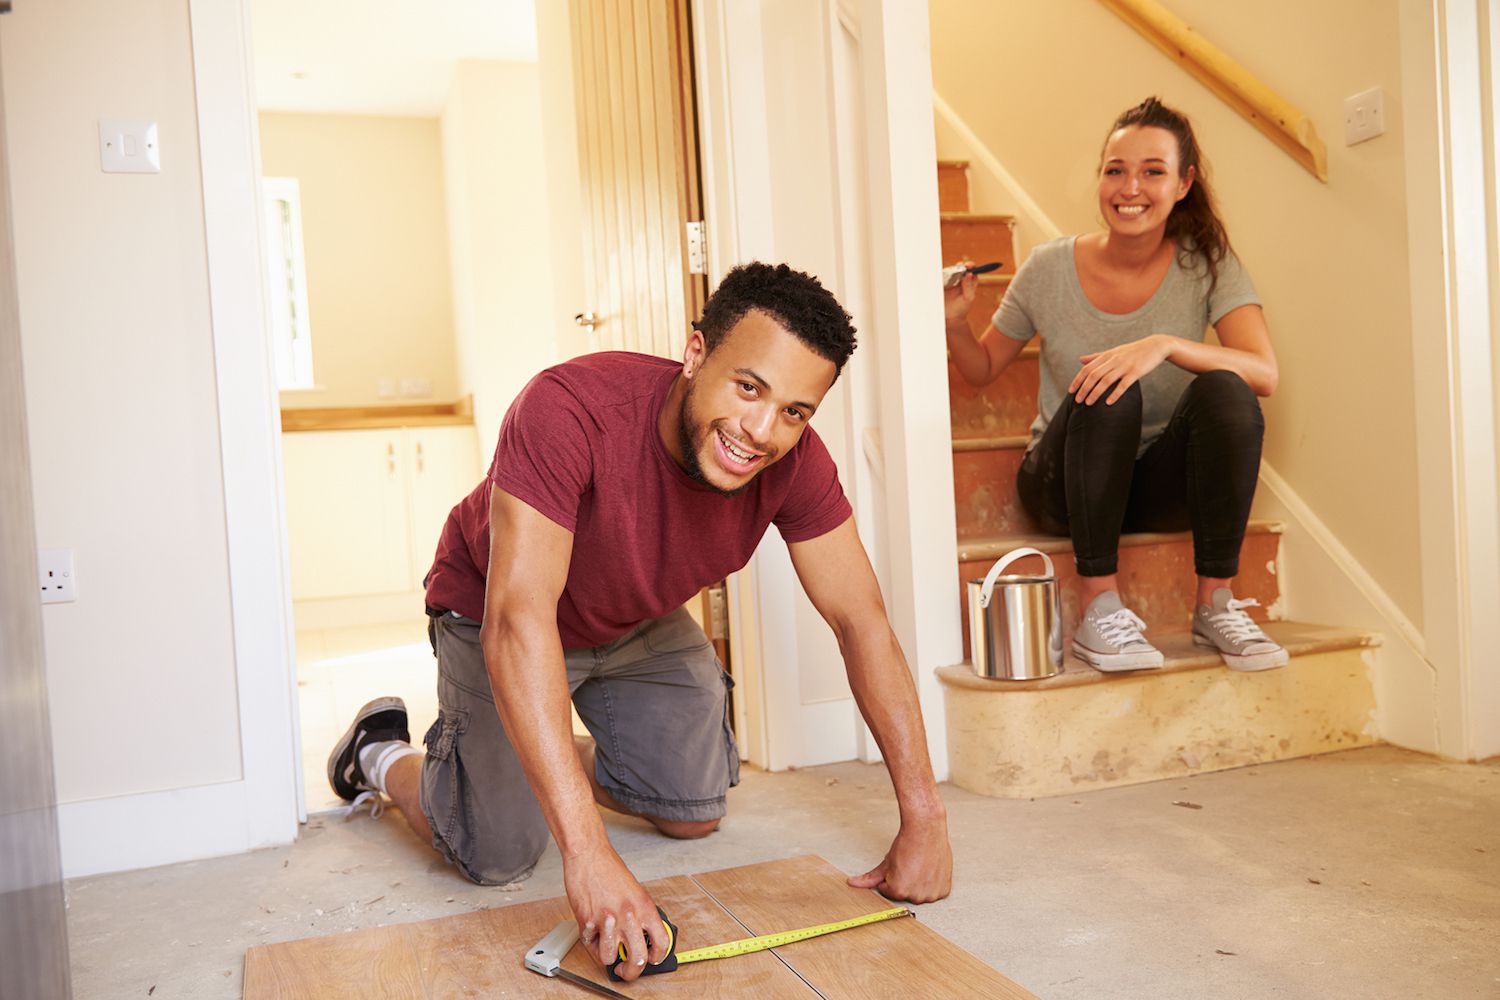 What Are The Best Home Improvements For Resale Value?